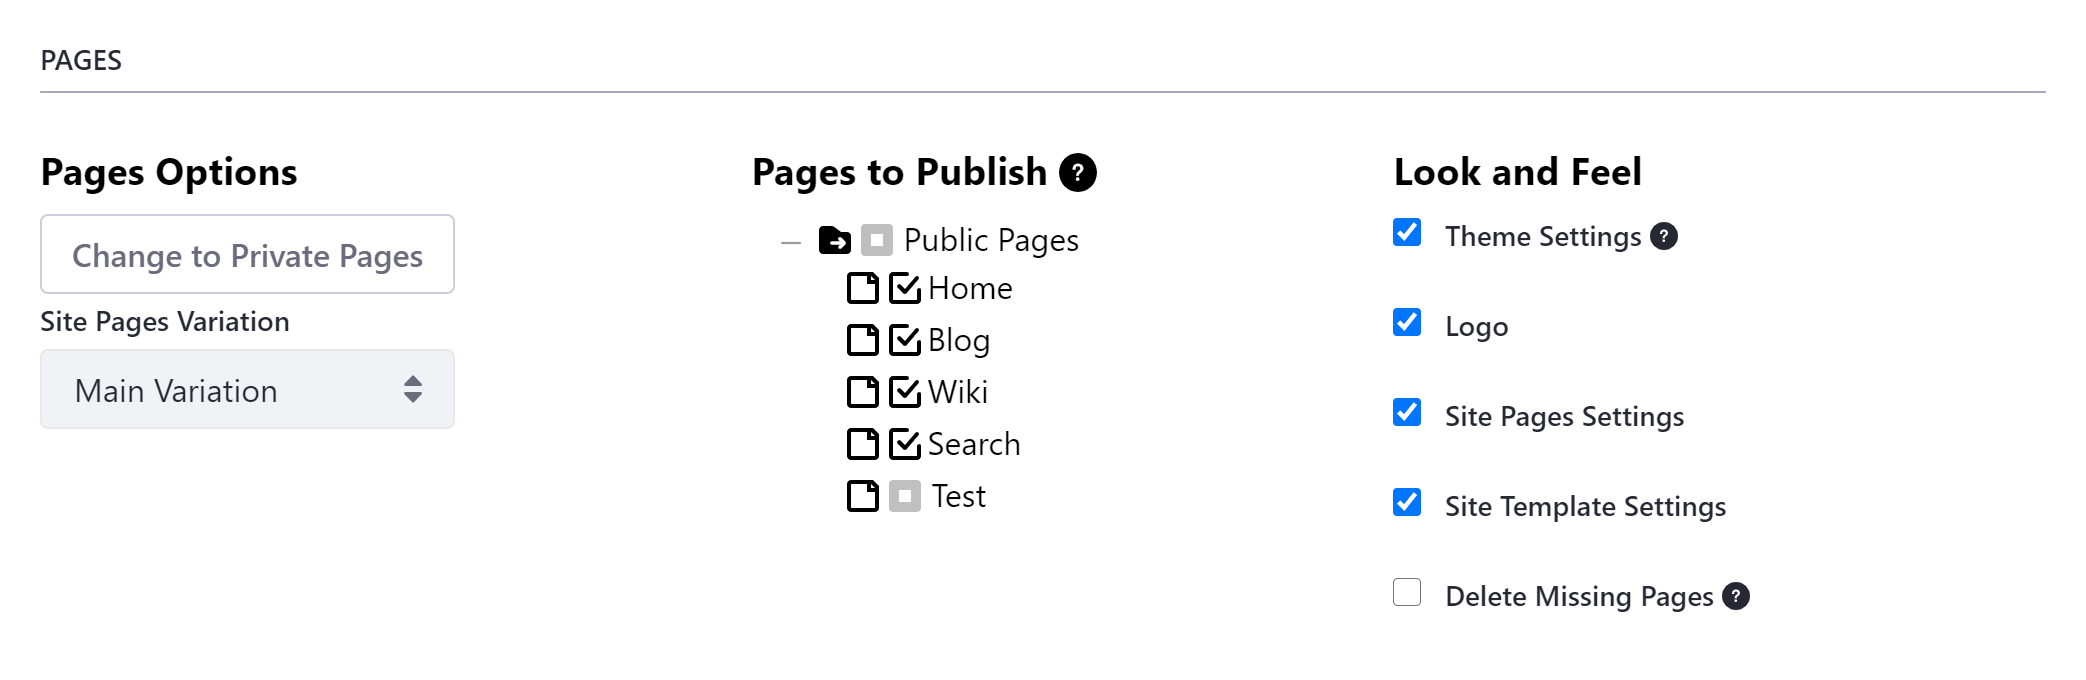 Select which page set variation and individual pages to publish, as well as the look and feel of selected pages.